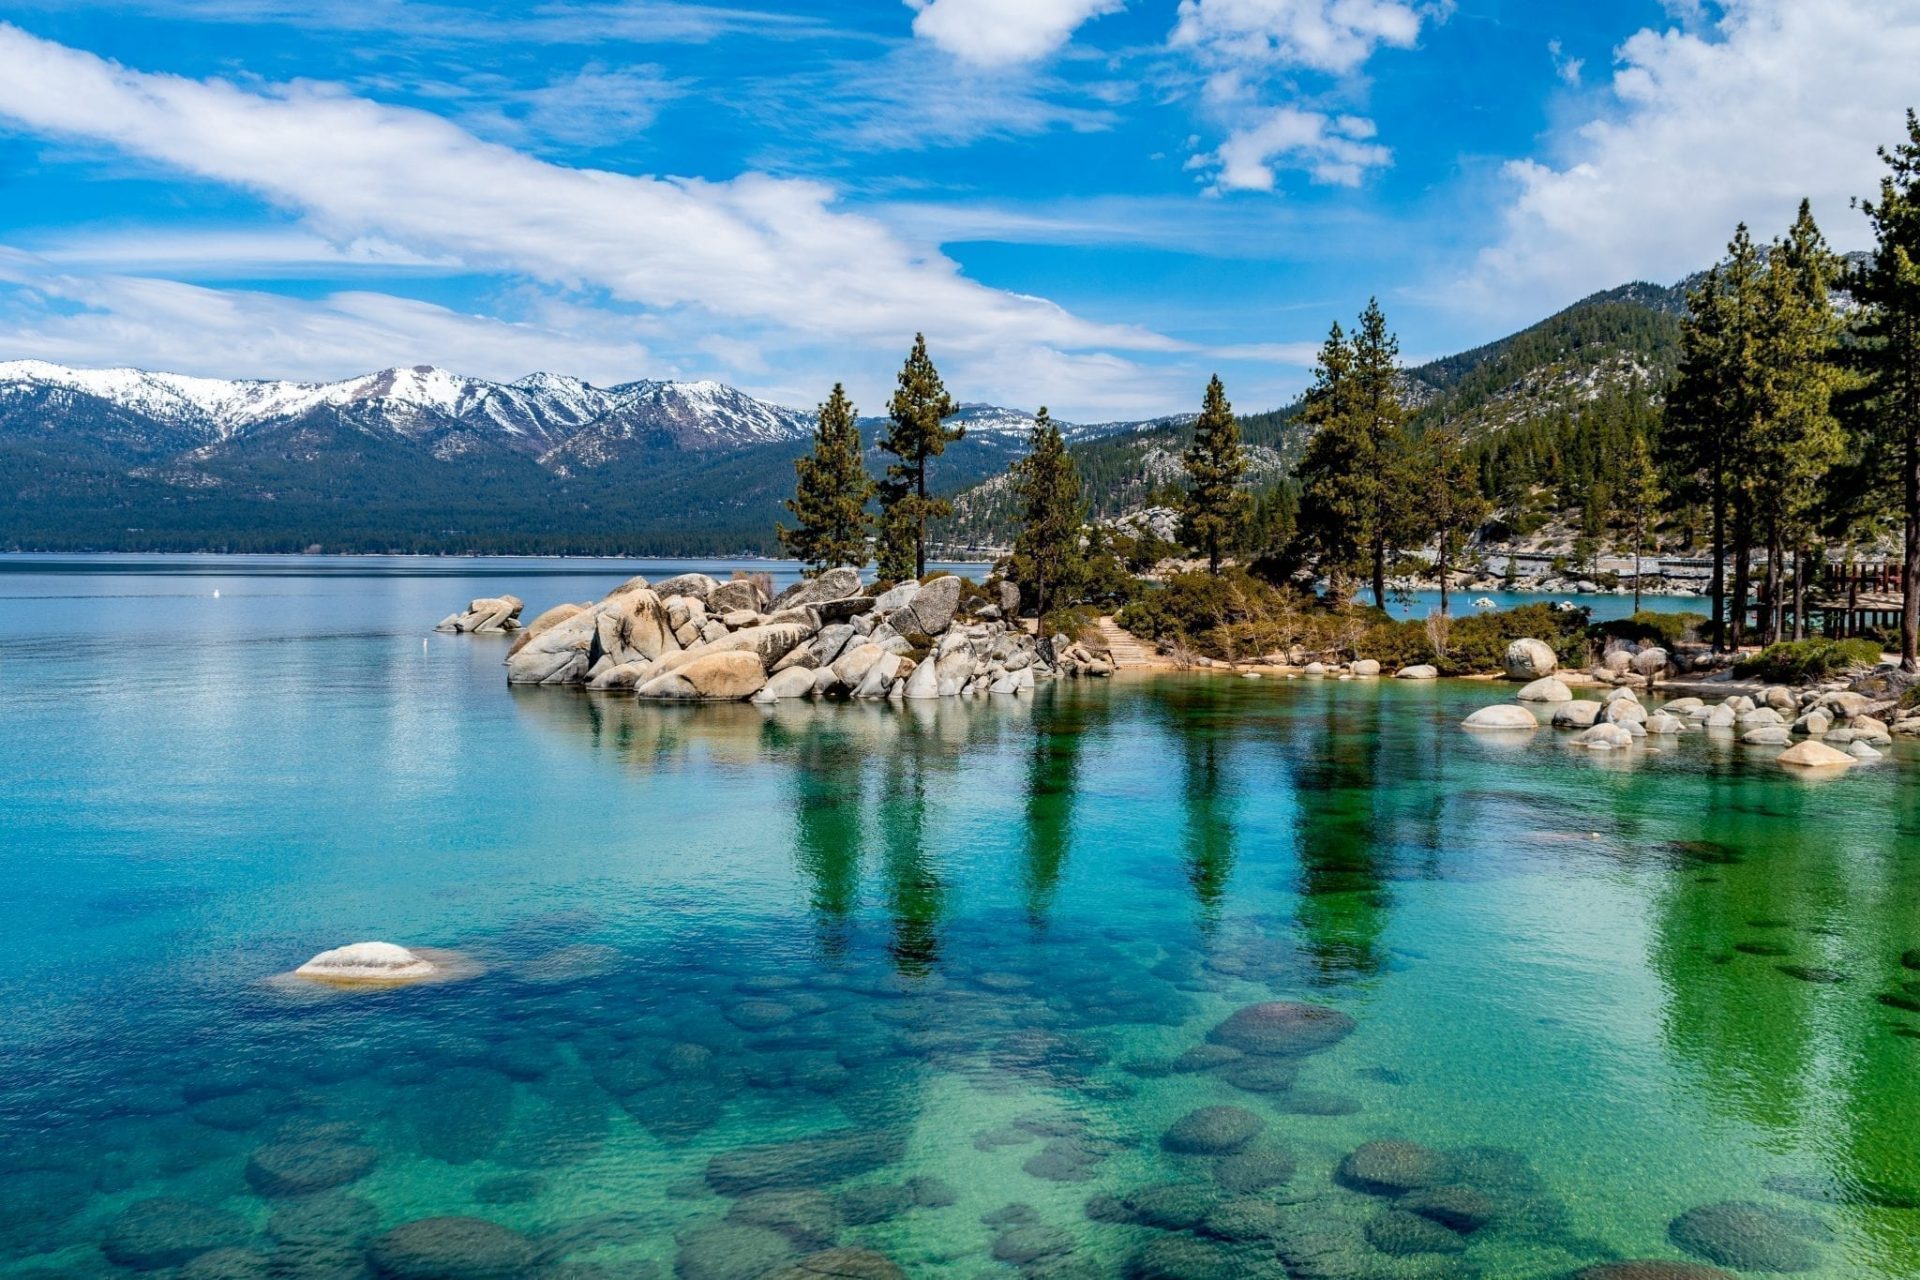 The Complete Guide to the Top 11 Vacation Spots in the US - Tale Of